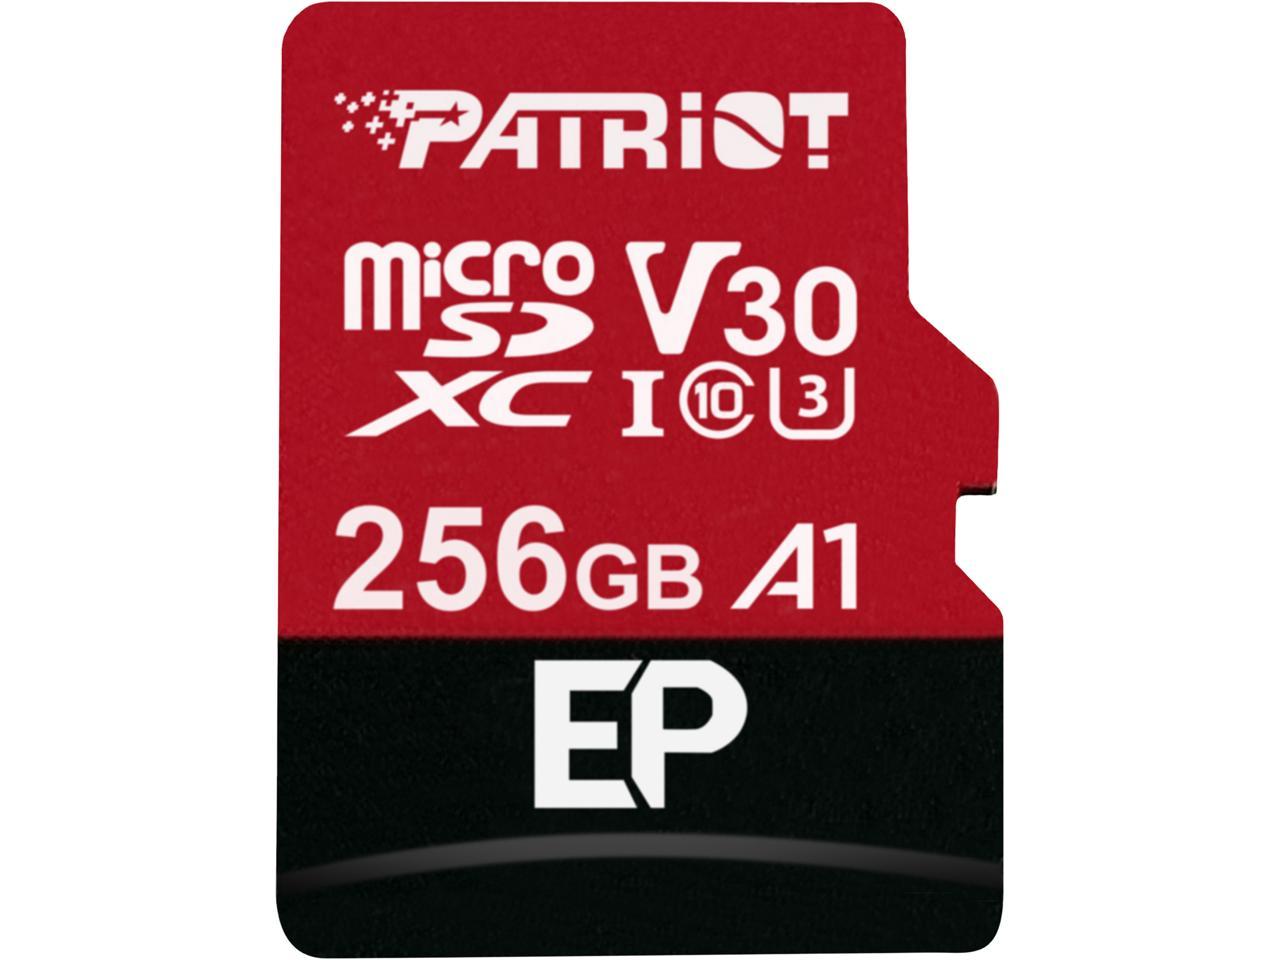 Patriot 256GB EP Series MicroSDXC U3, A1, V30. 4K Memory Card with Adapter, Reads 90MB/s, Writes 80MB/s